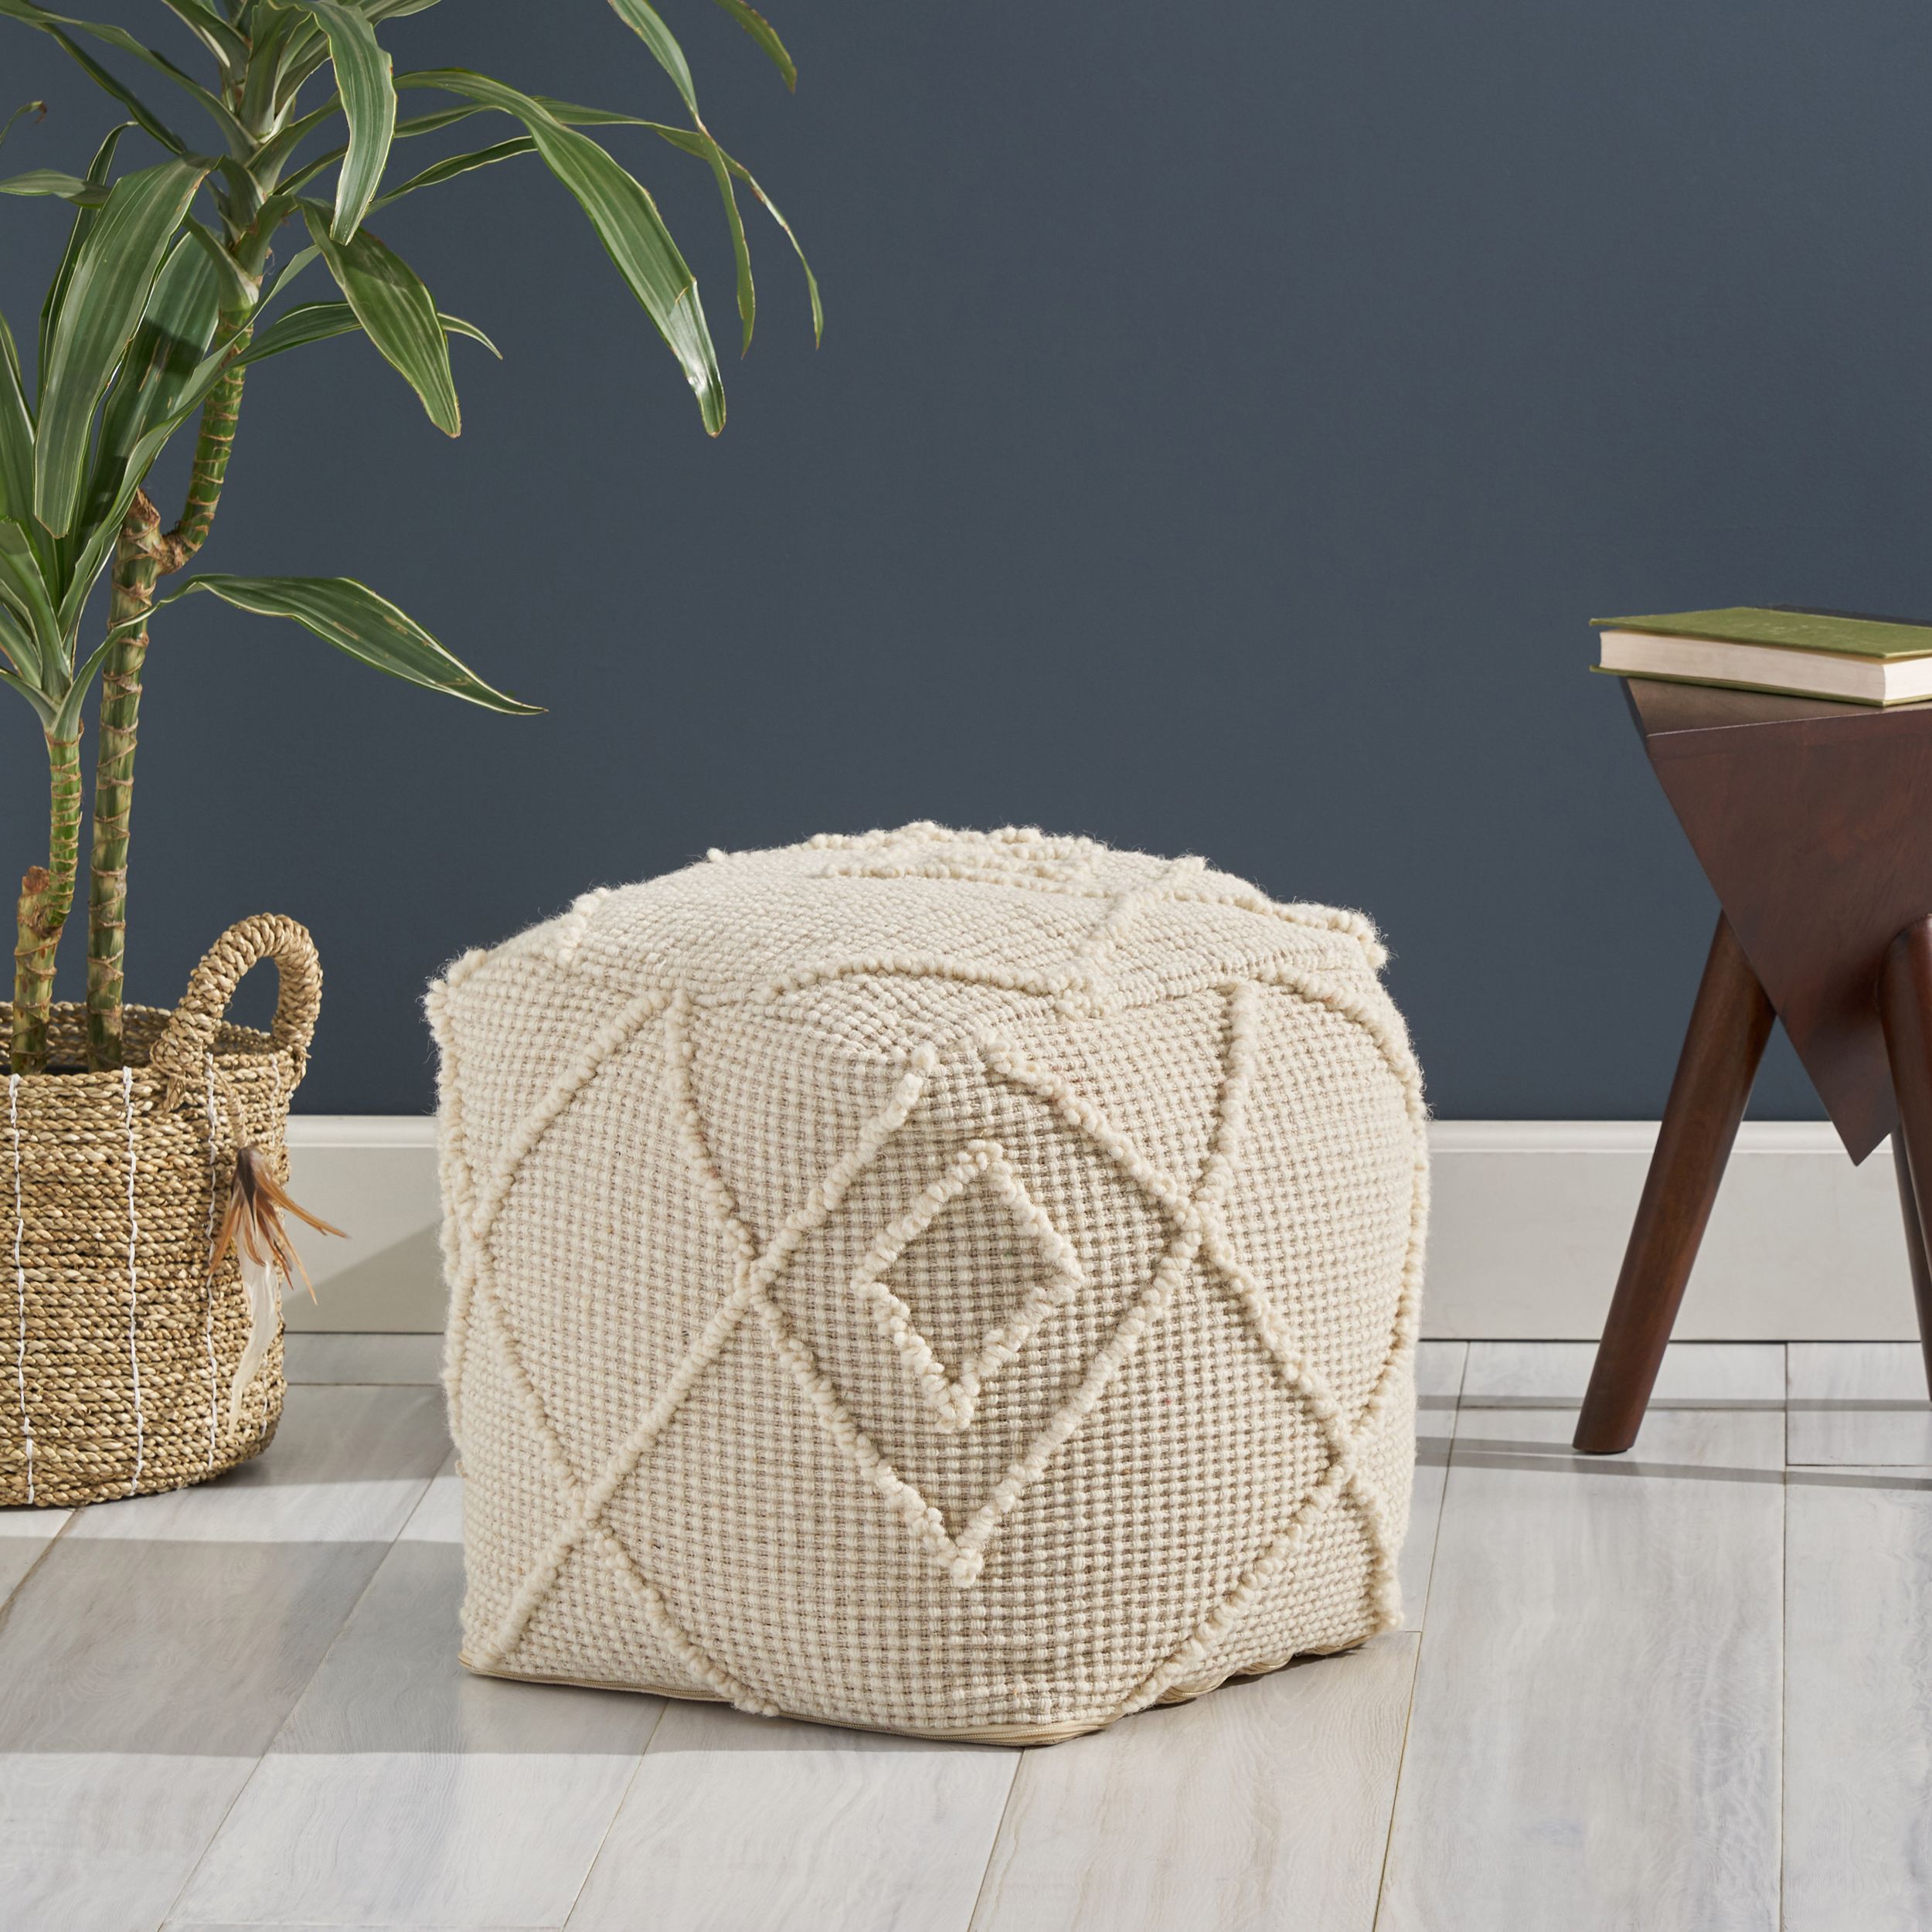 2017 Noble House Cube Geometric Woven Wool Pouf, Off White – Walmart Within White Ivory Wool Pouf Ottomans (View 5 of 10)